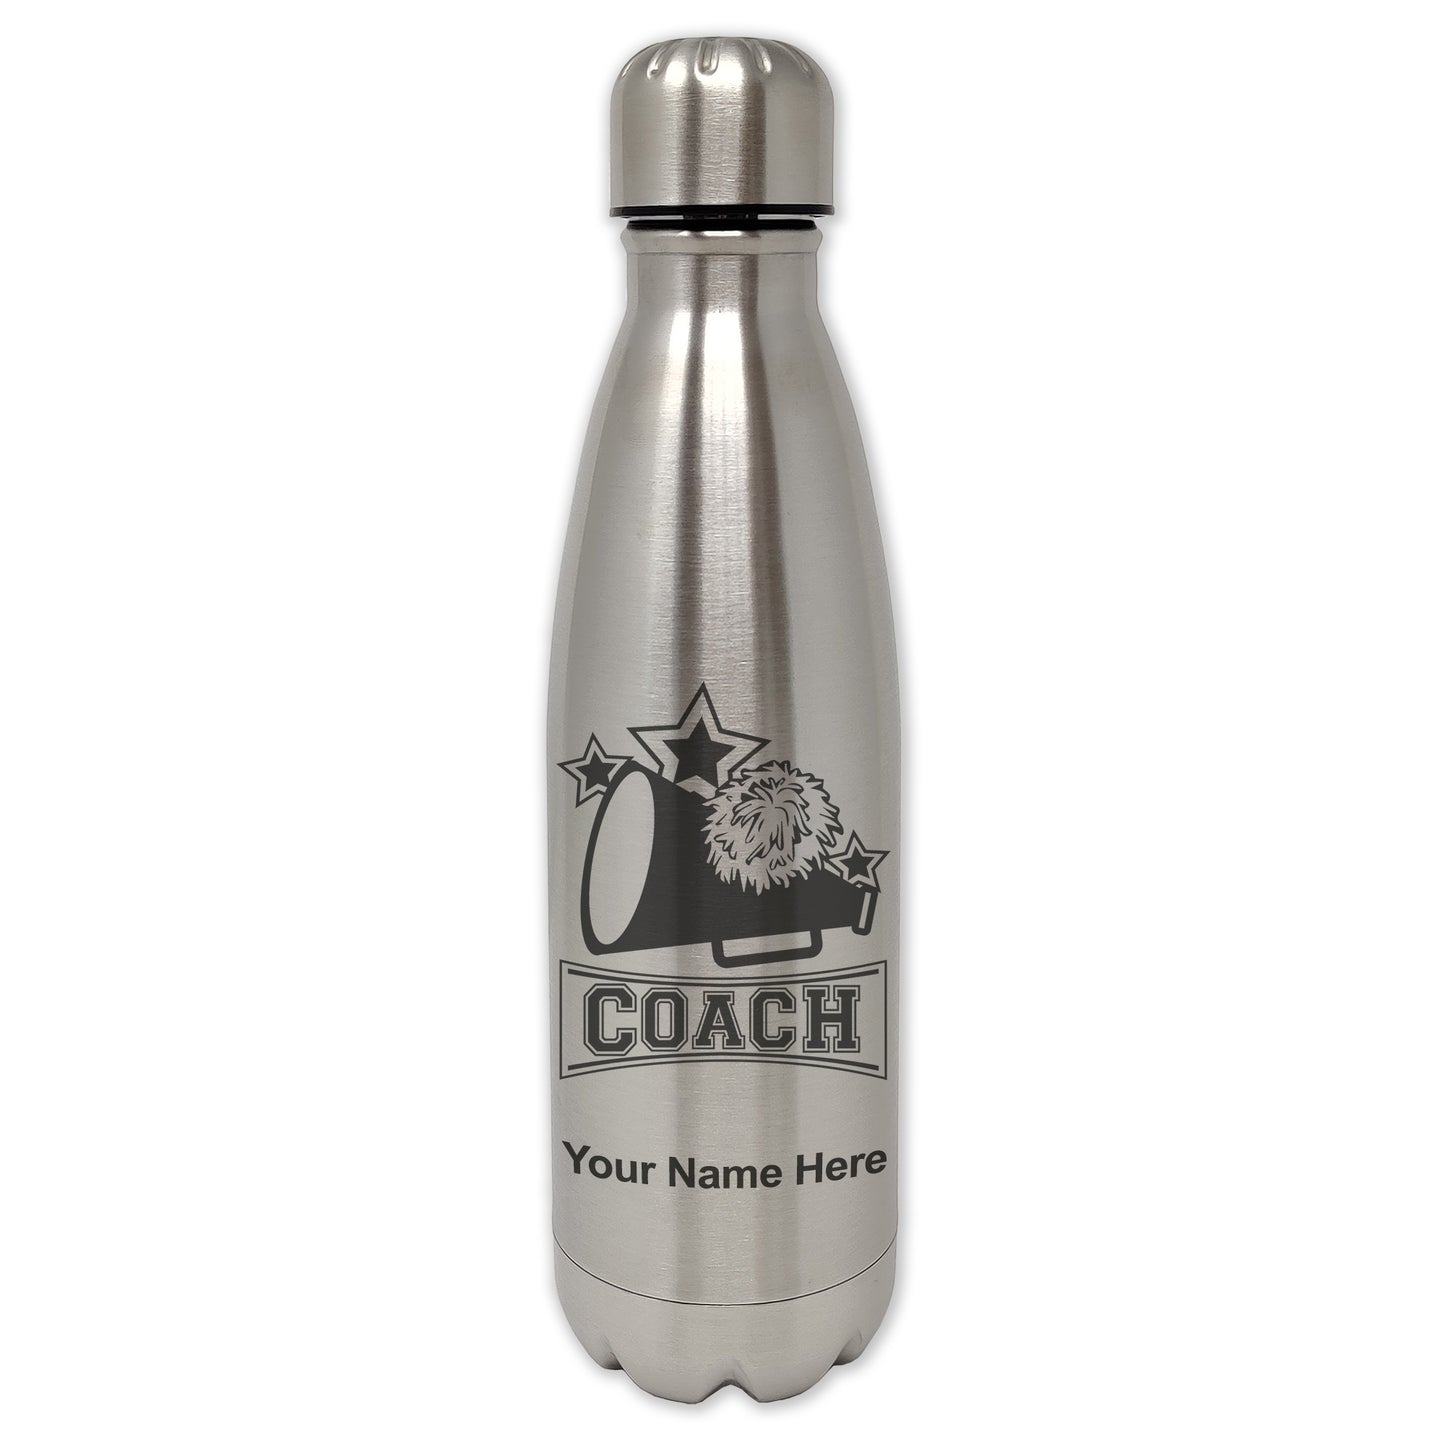 LaserGram Single Wall Water Bottle, Cheerleading Coach, Personalized Engraving Included